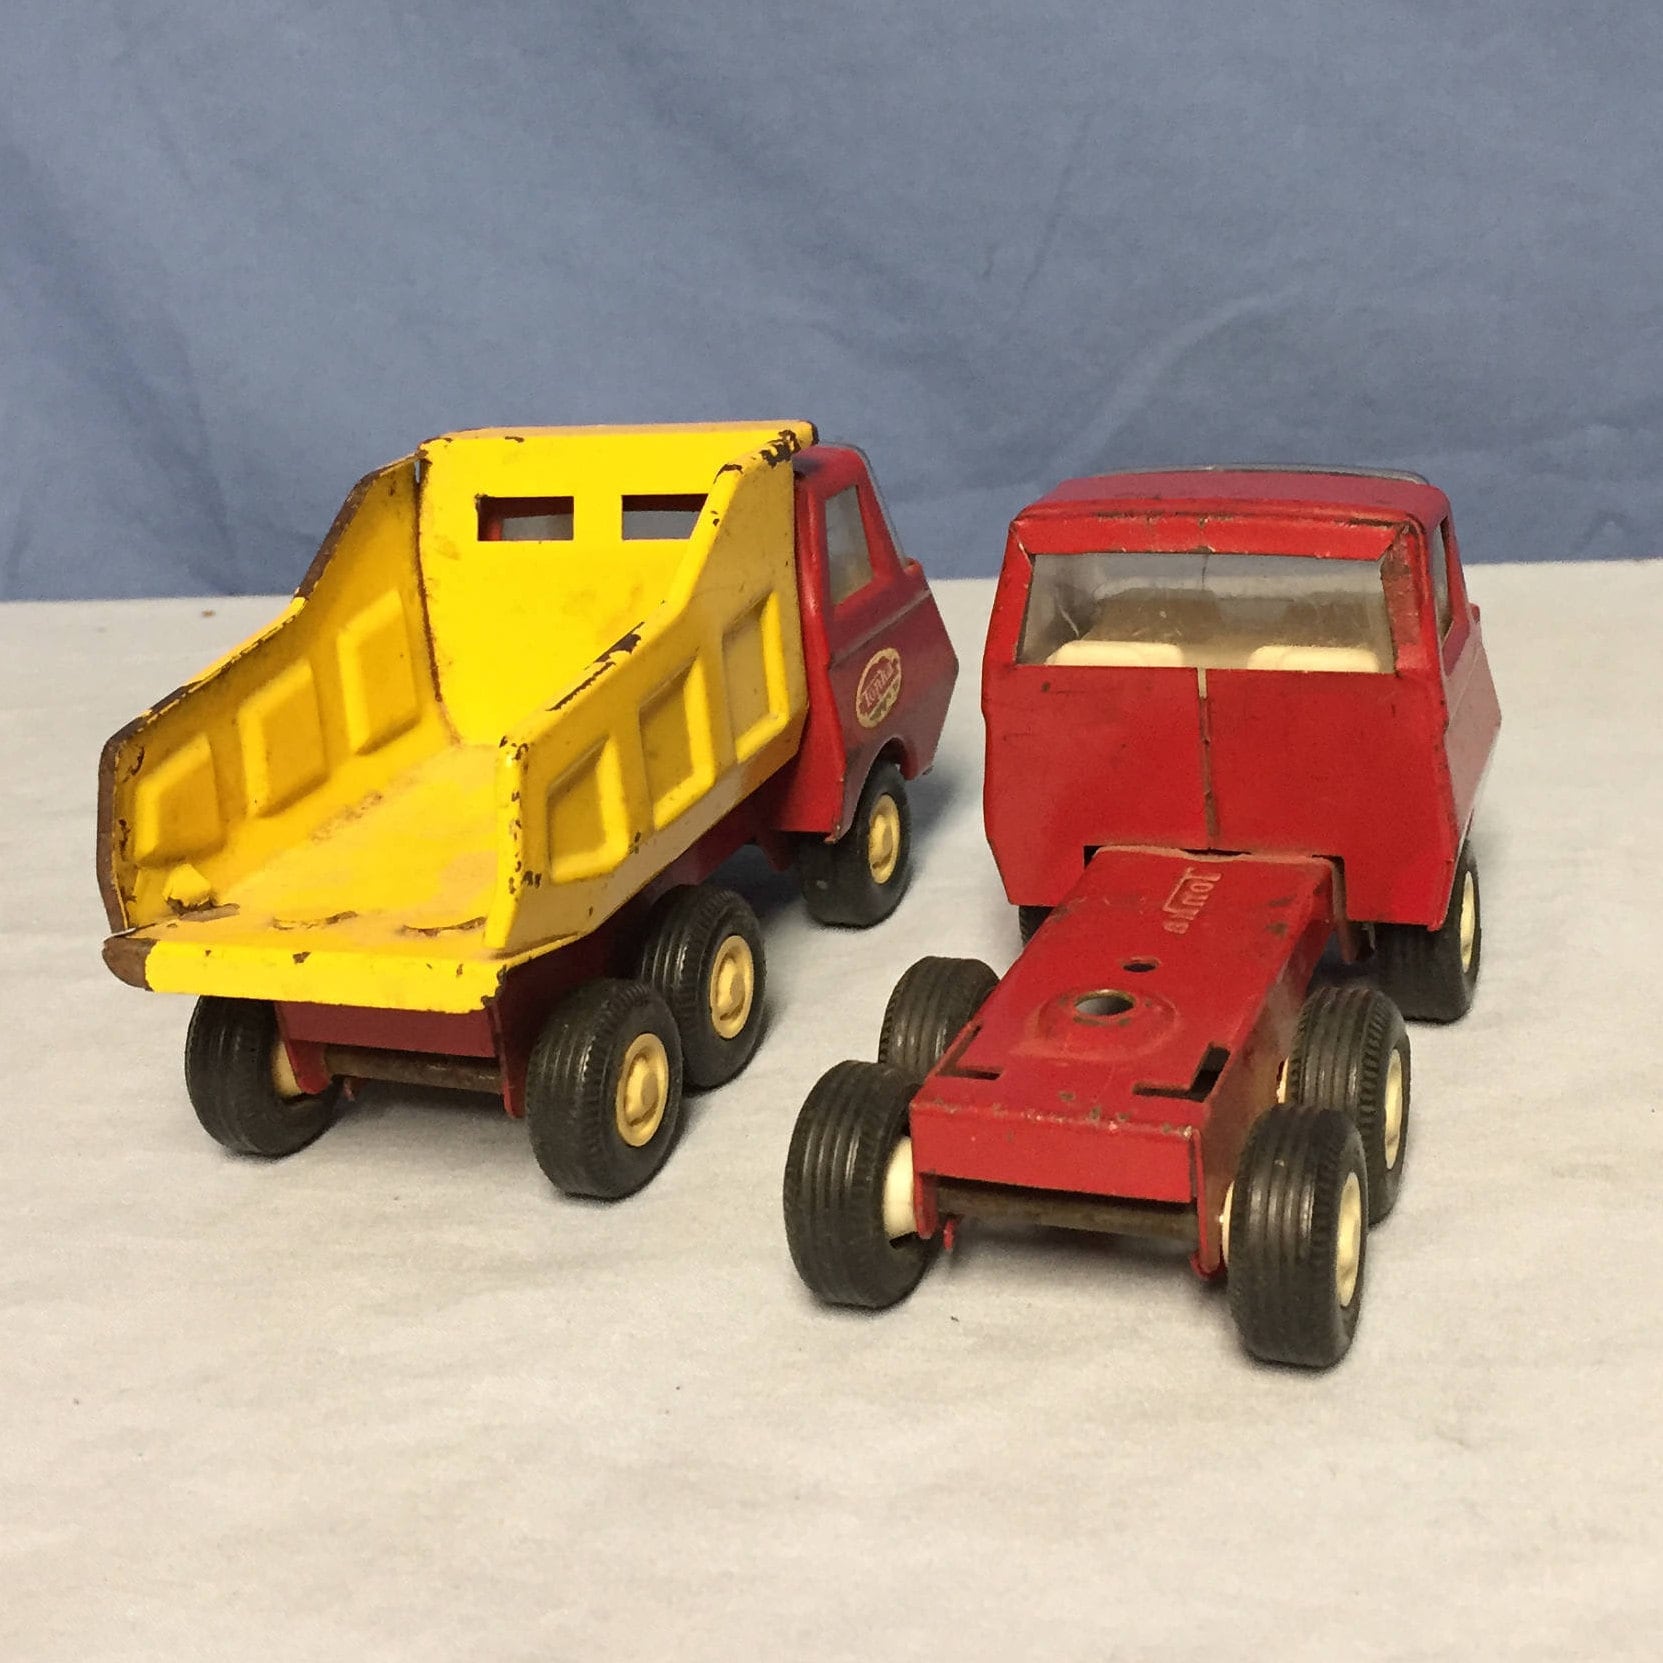 2 Vintage Tonka Die-Cast Mini Trucks, Dump Truck with Red Cab, and ...